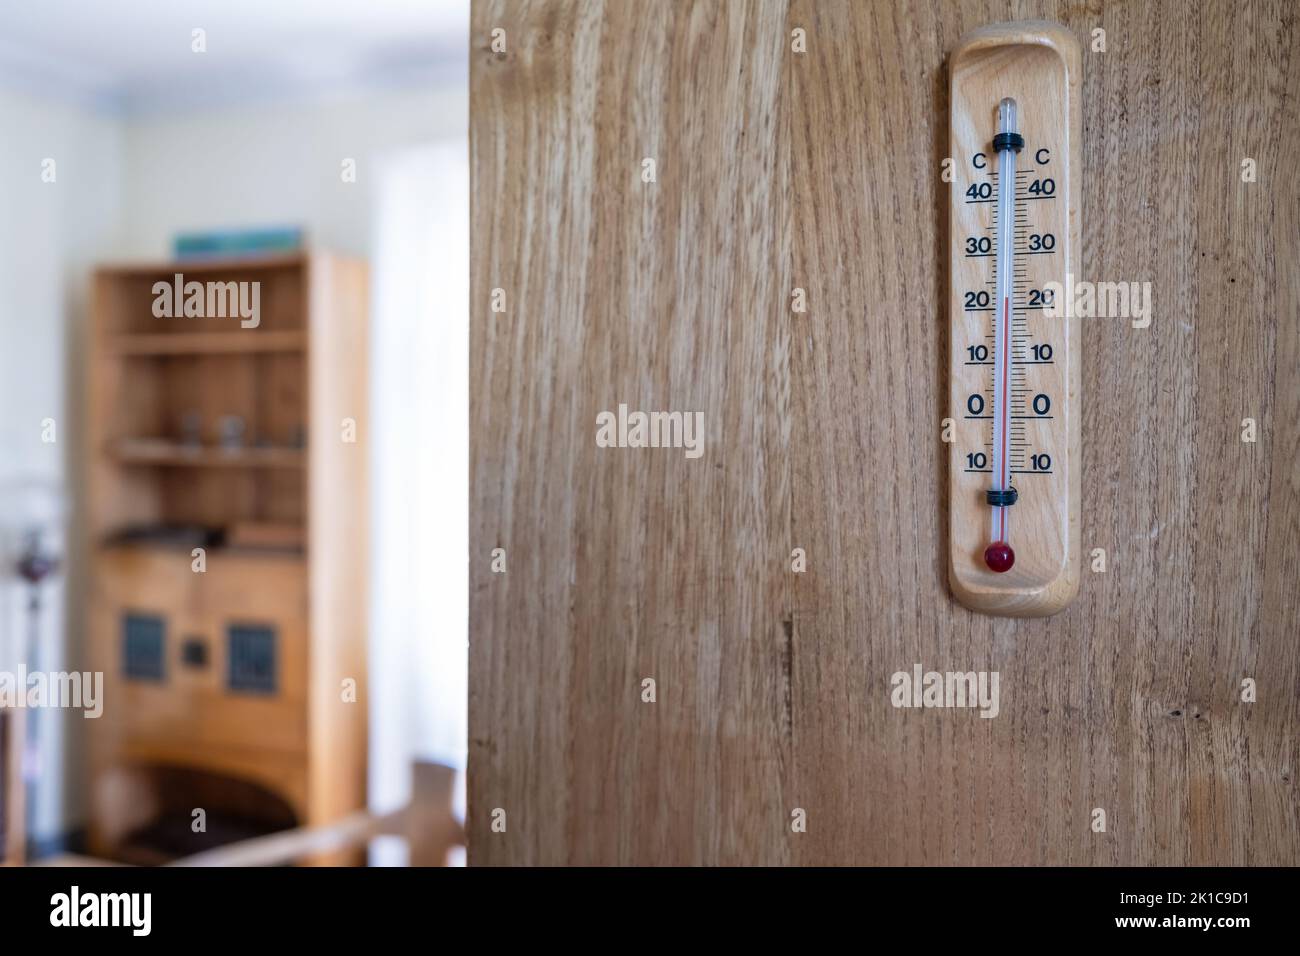 Mercury thermometer for determining the temperature indoors, hanging on a wooden wall. Stock Photo